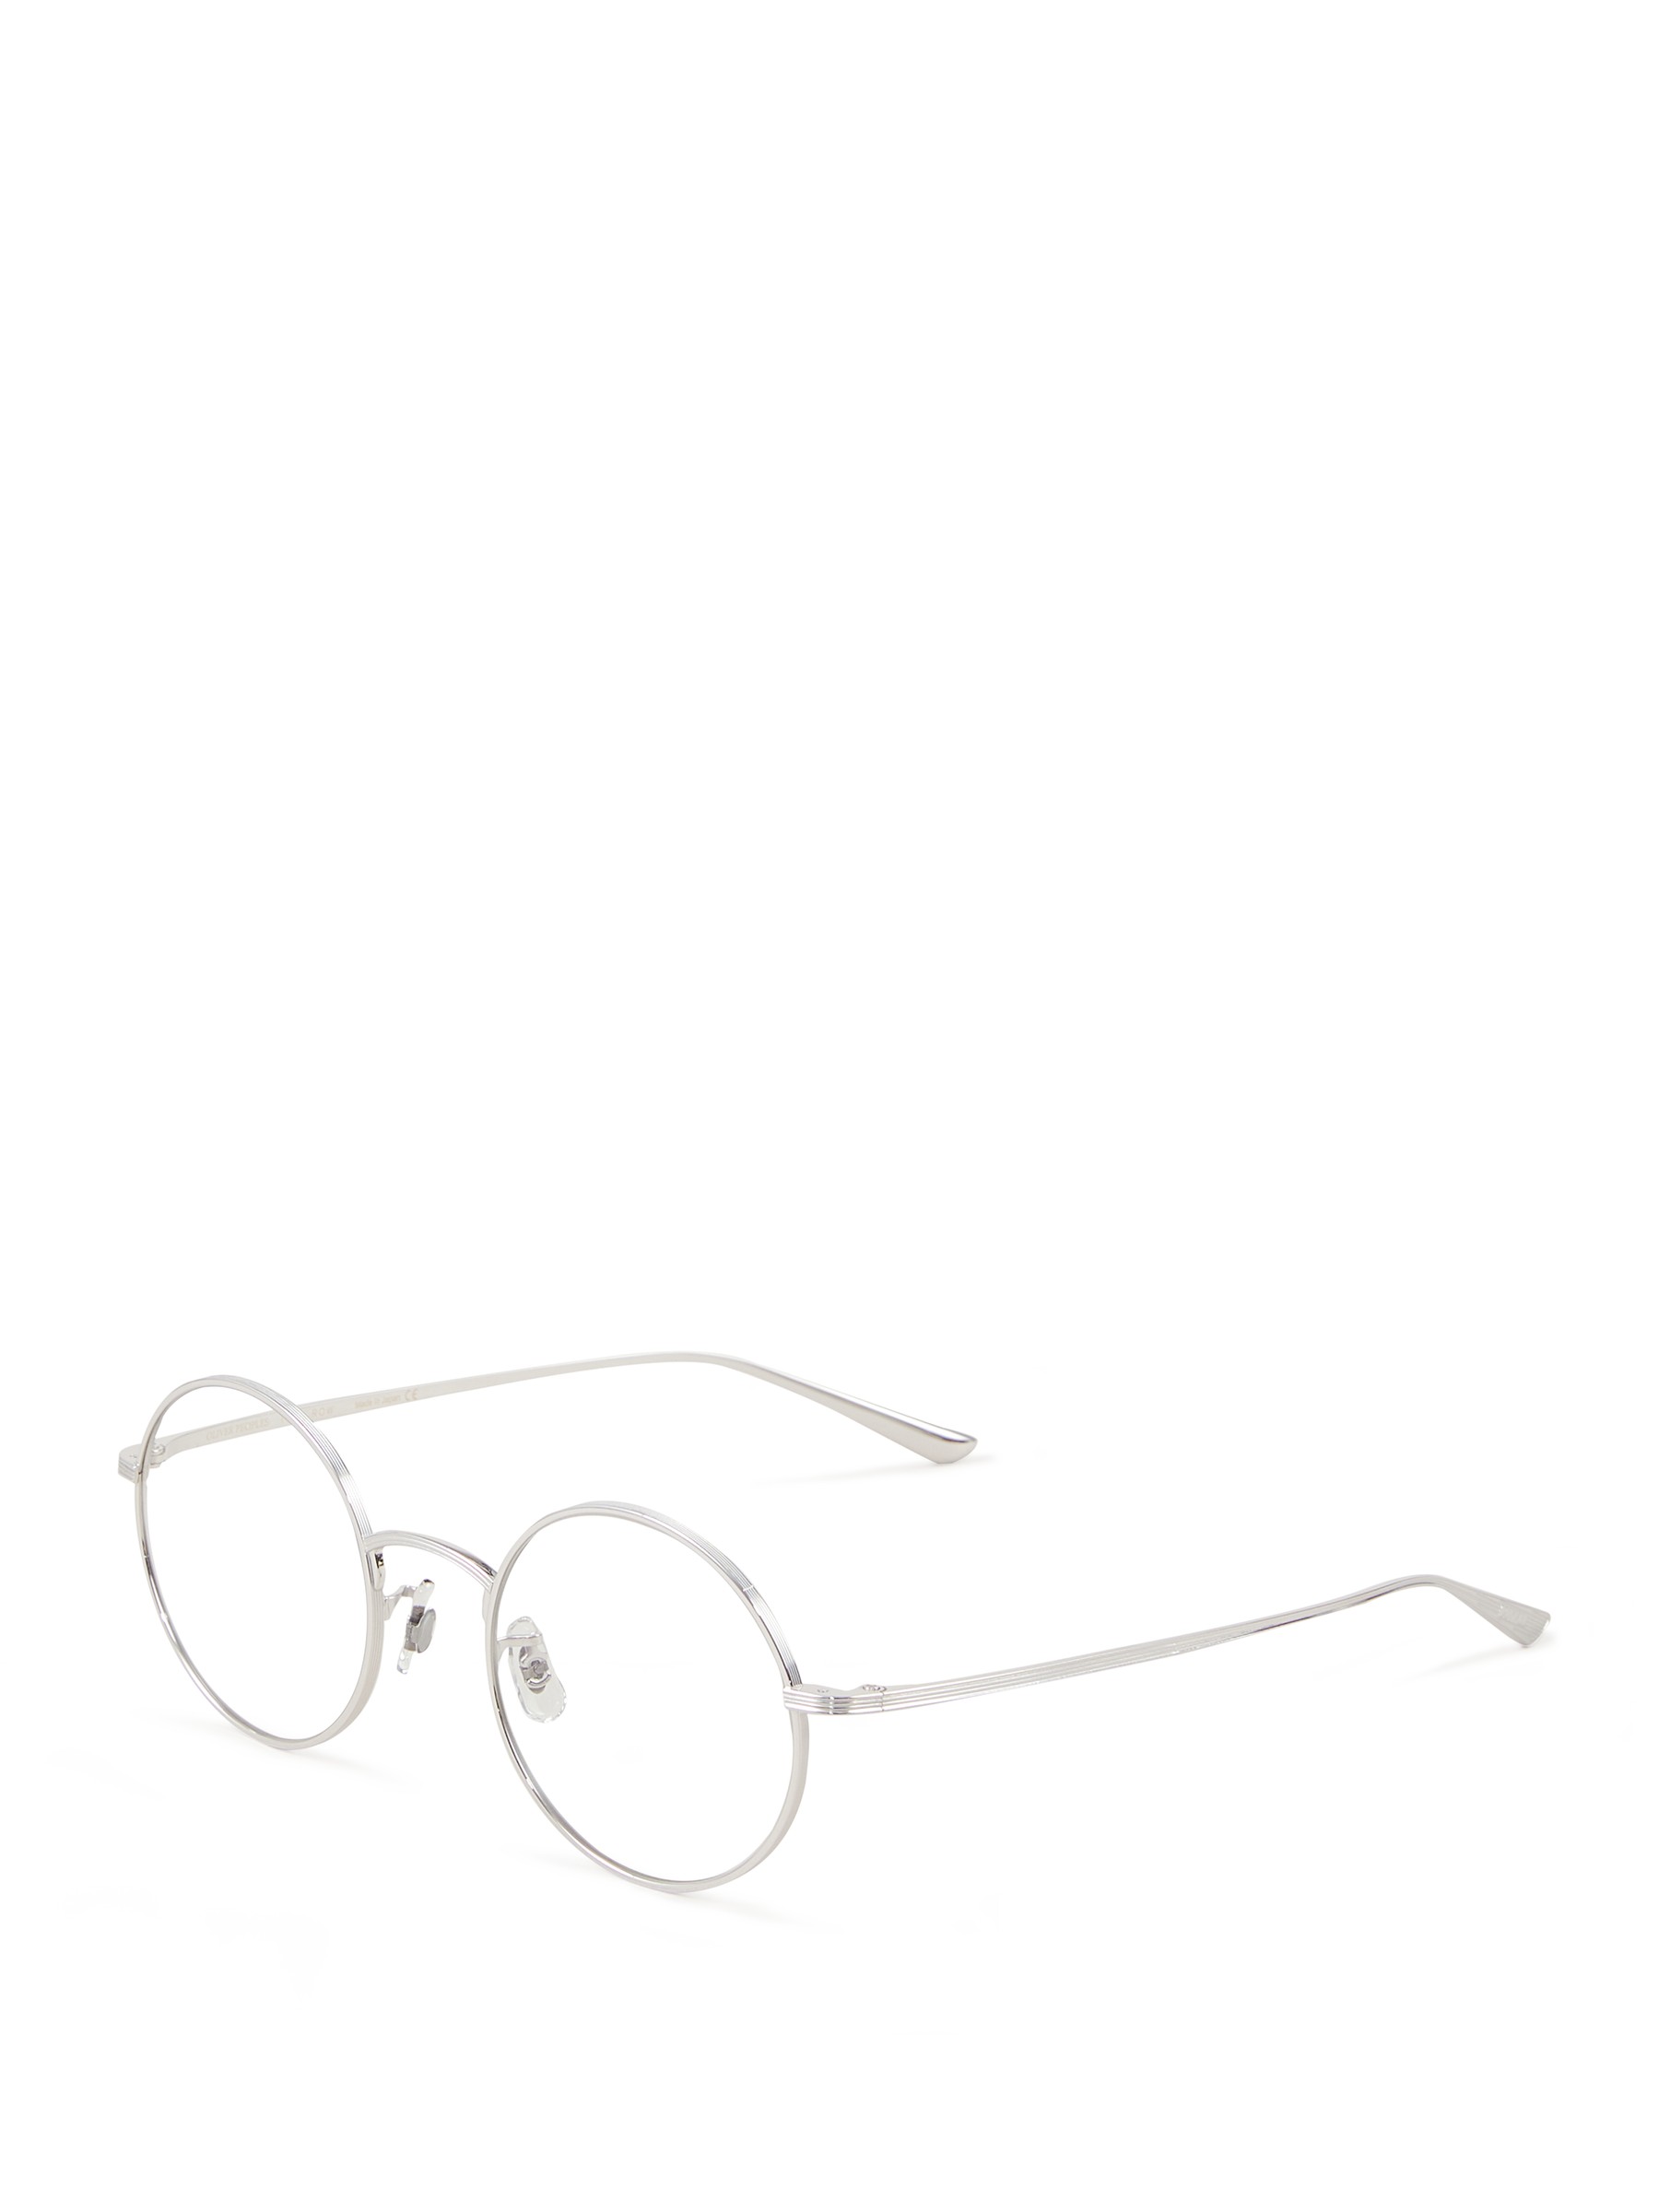 Oliver Peoples Glasses 'After Midnight' Silver | Sunglasses